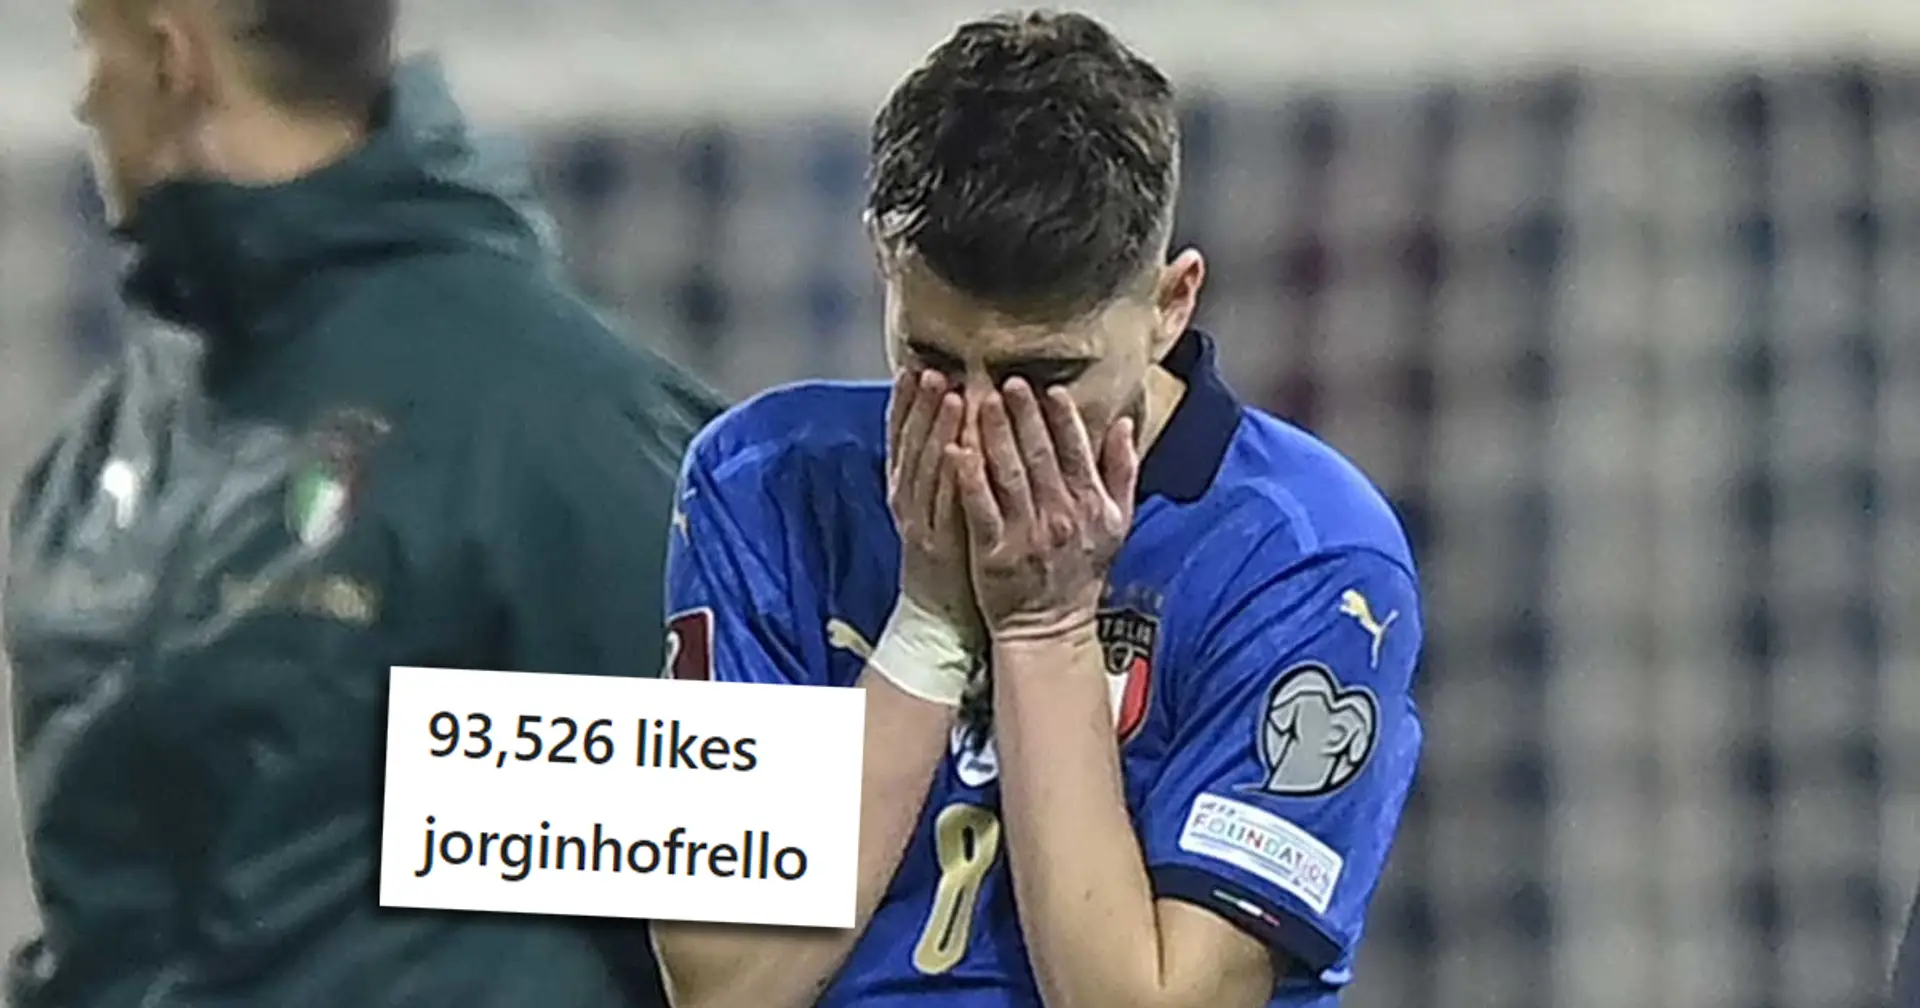 Jorginho sends message to fans after heartbreaking Italy defeat in World Cup play-offs